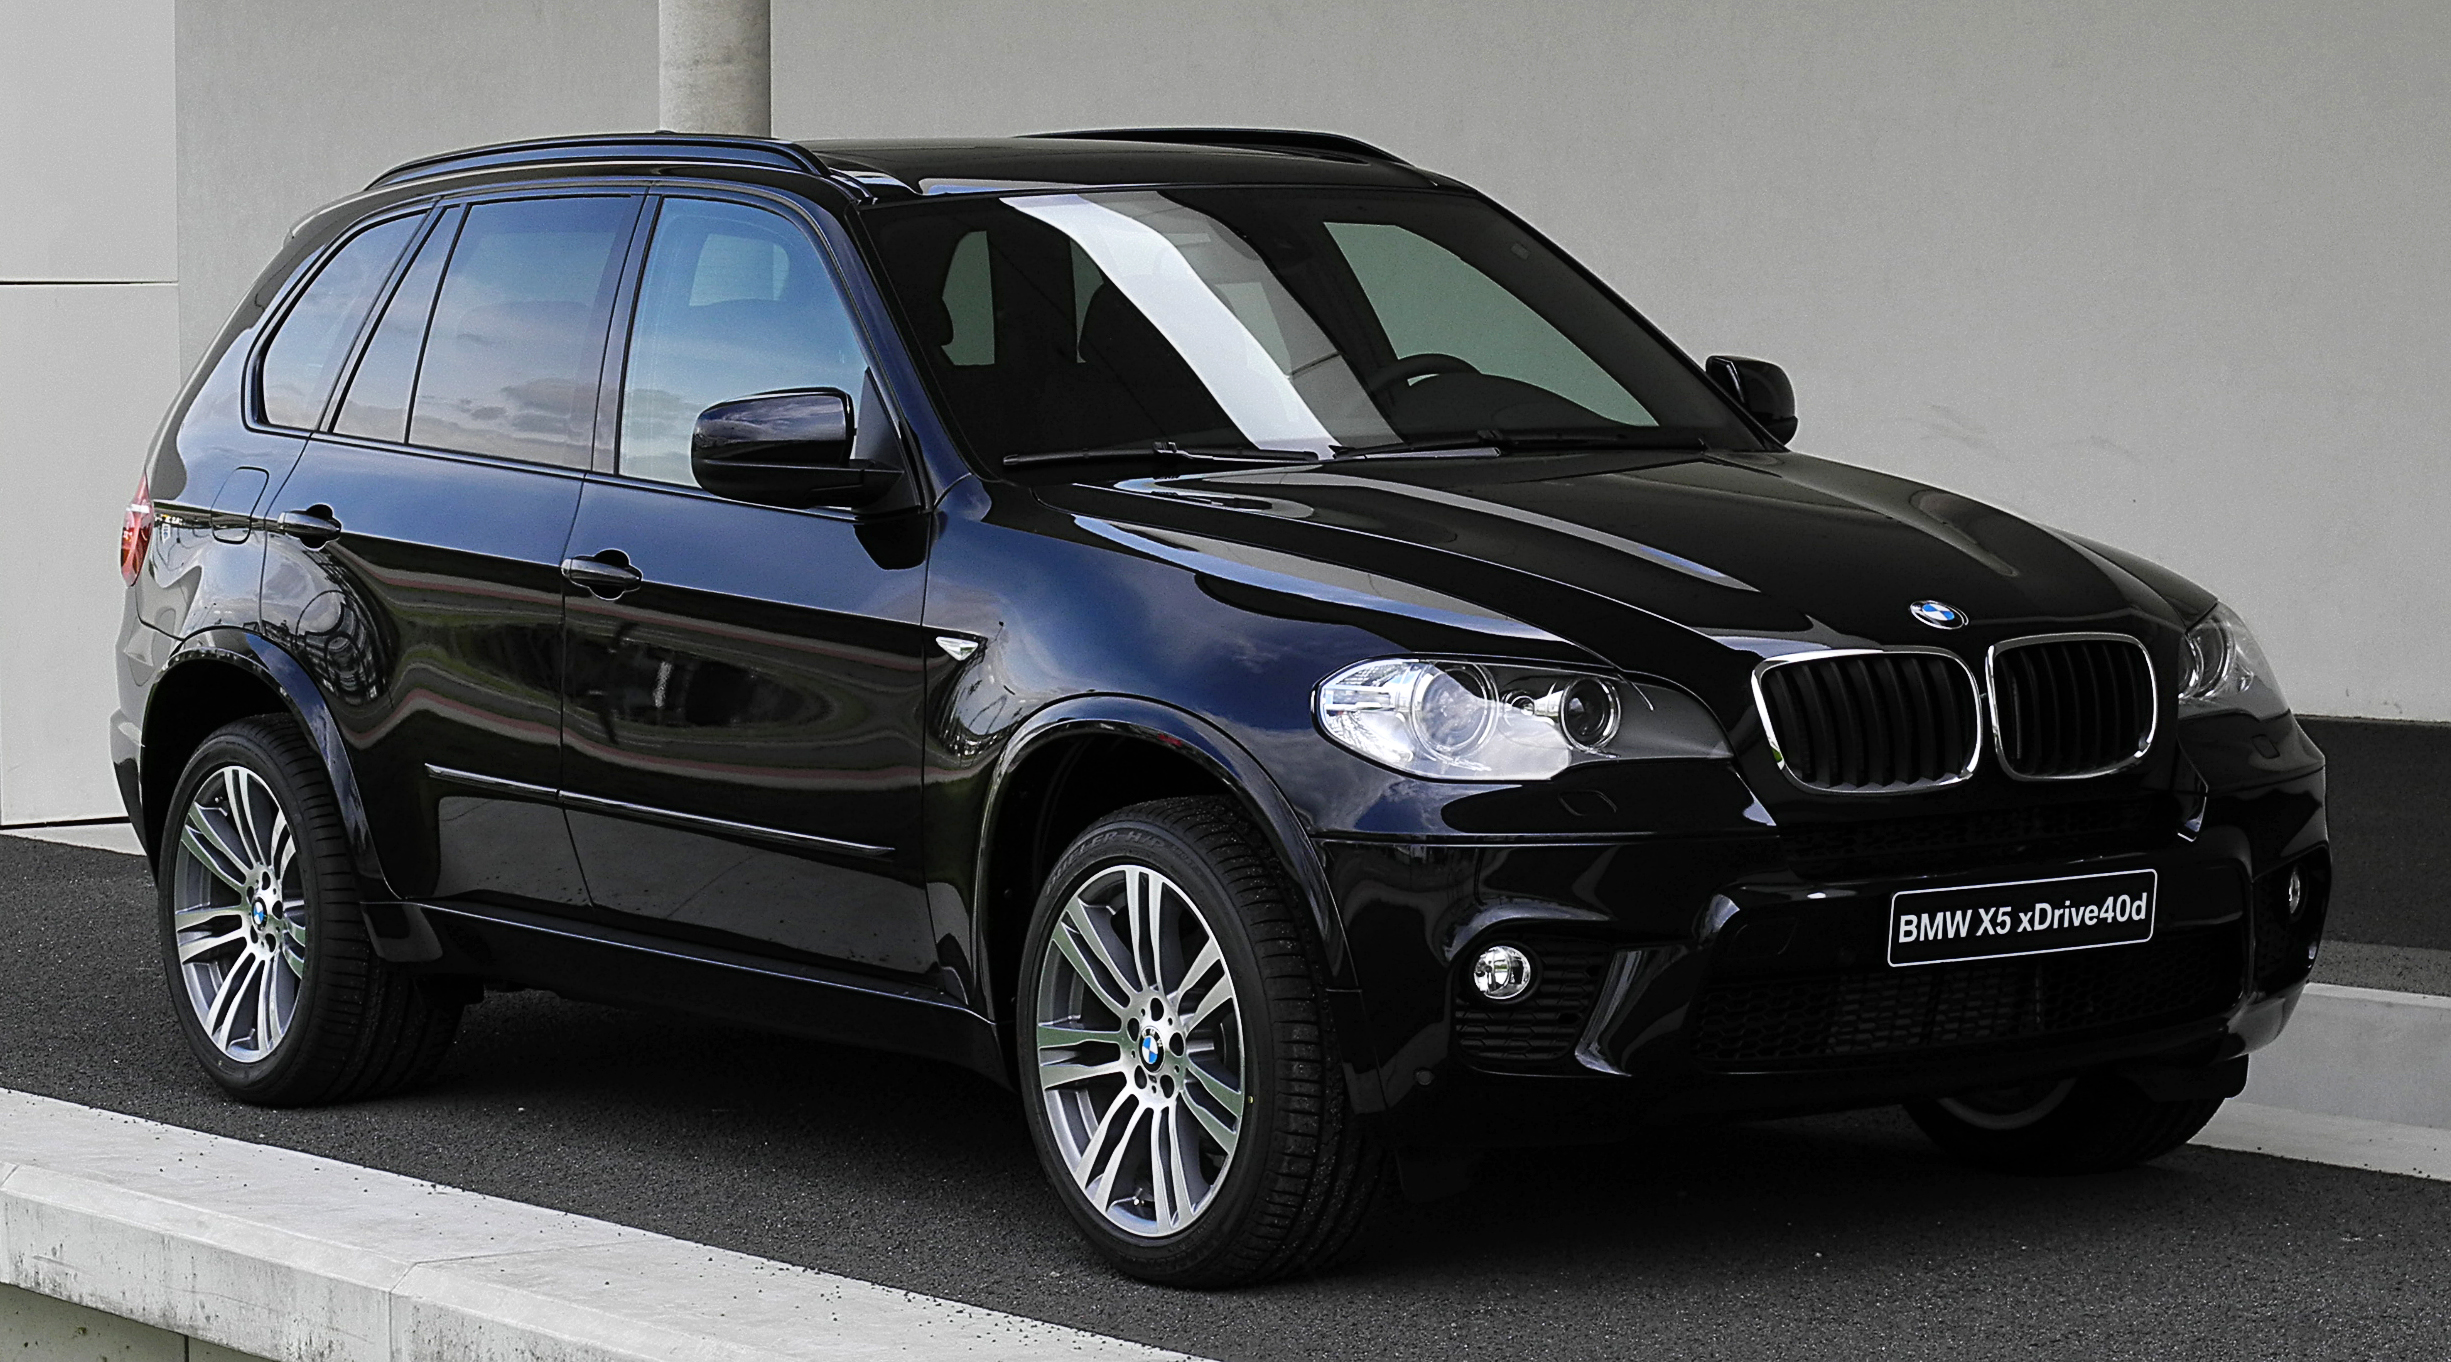 BMW X5 II (E70) Facelift 35d 3.0d AT (265 HP) 4WD - Car info guide